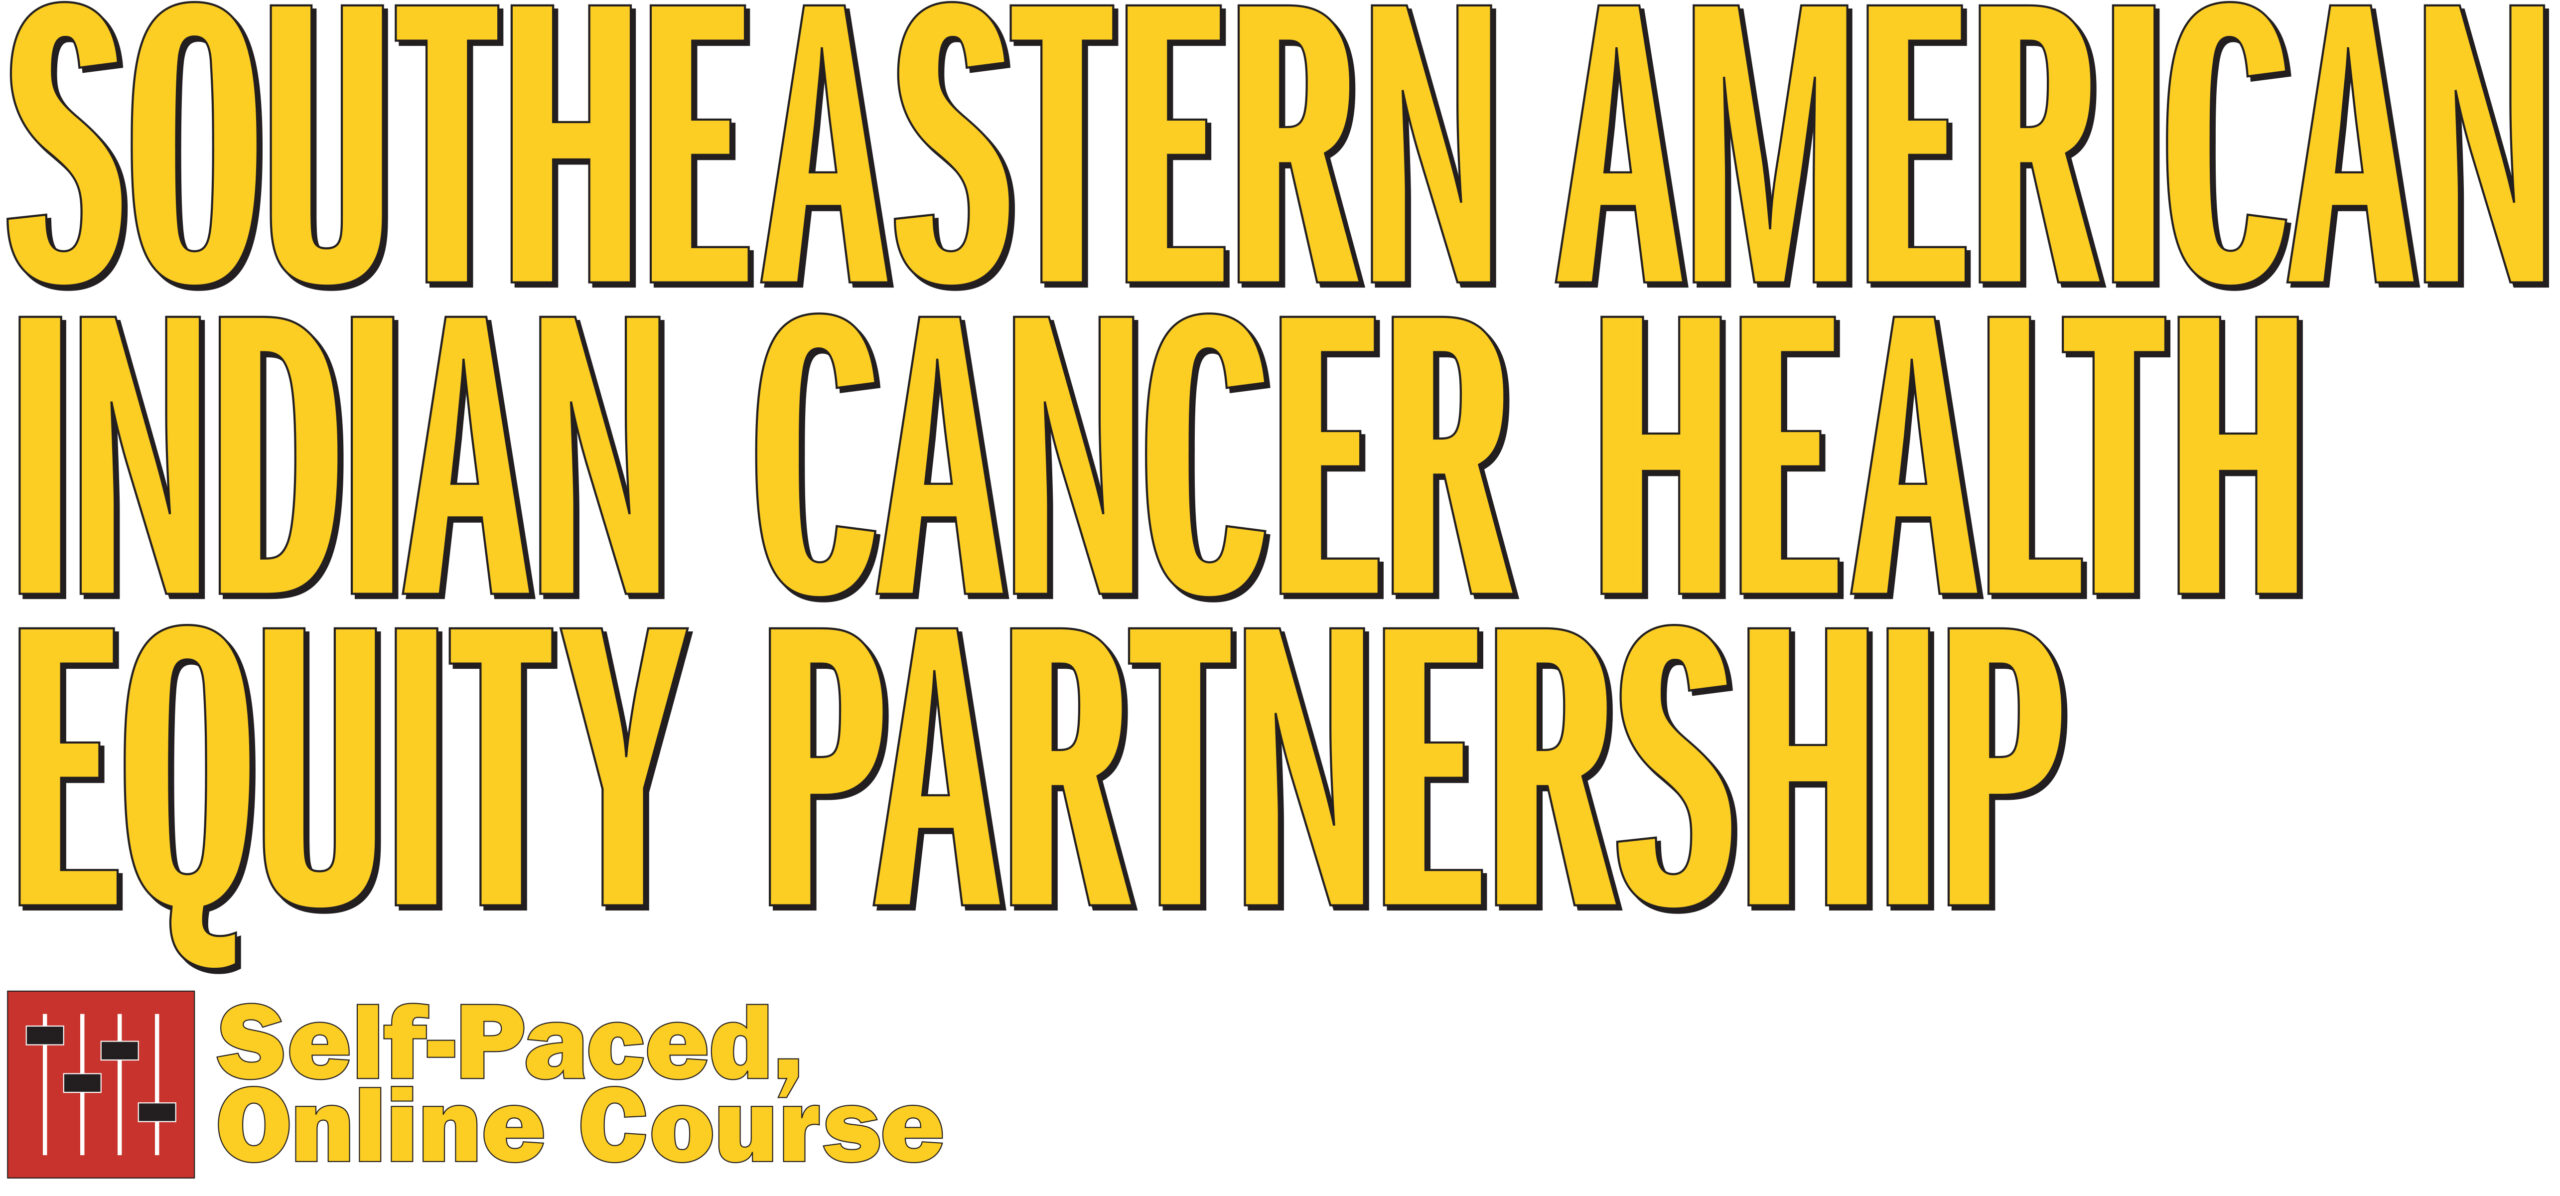 Southeastern American Indian Cancer Health Equity Partnership Logo